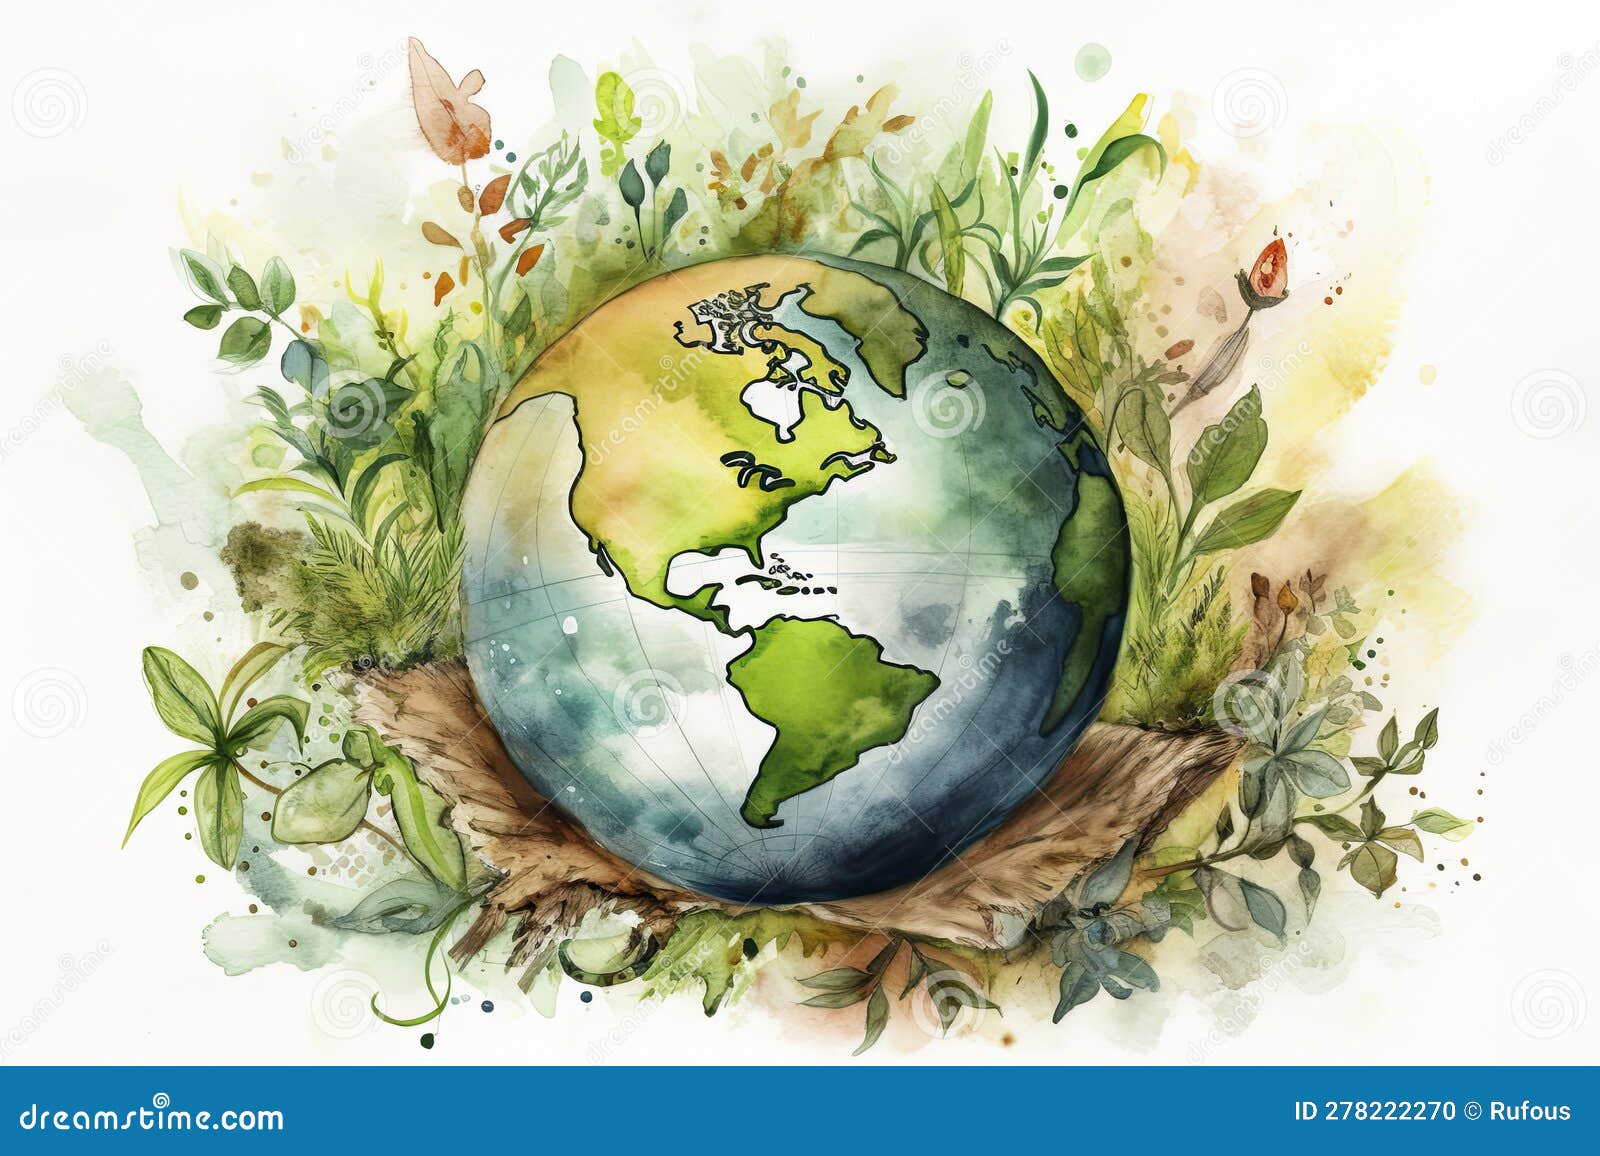 How to Draw Go Green World Environment Day - YouTube